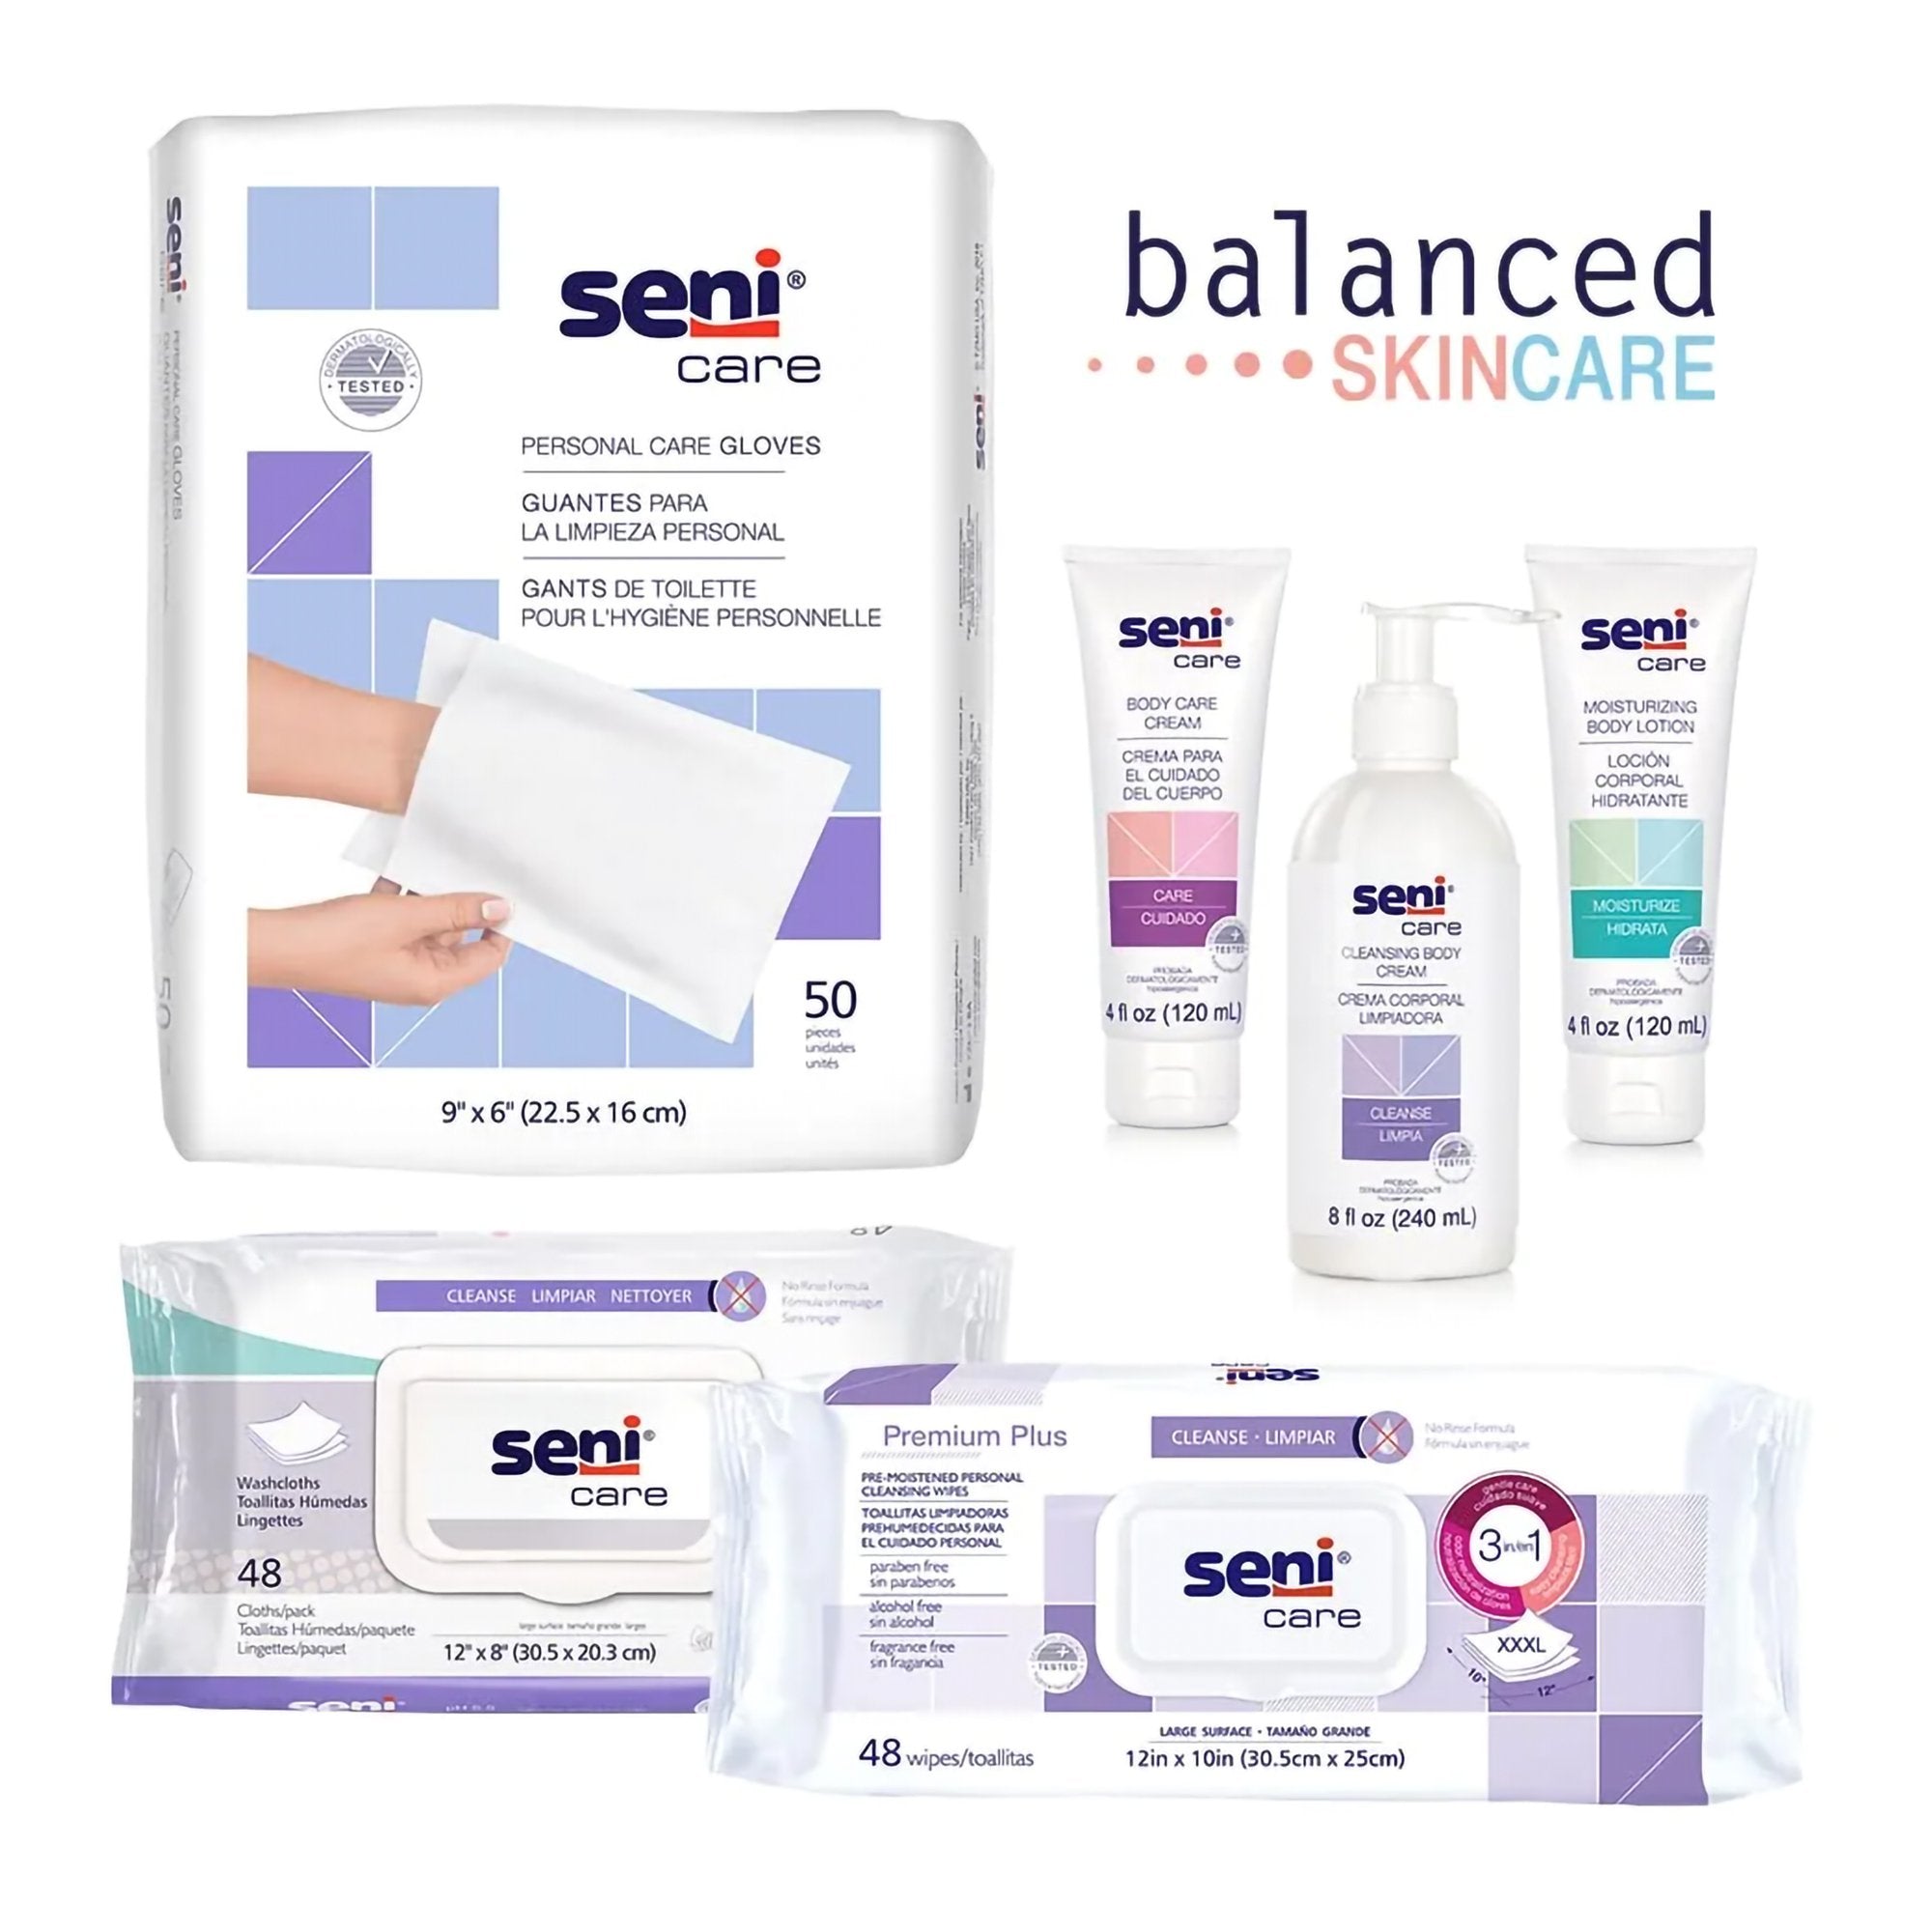 Personal Cleansing Wipe Seni® Care Soft Pack Unscented 48 Count